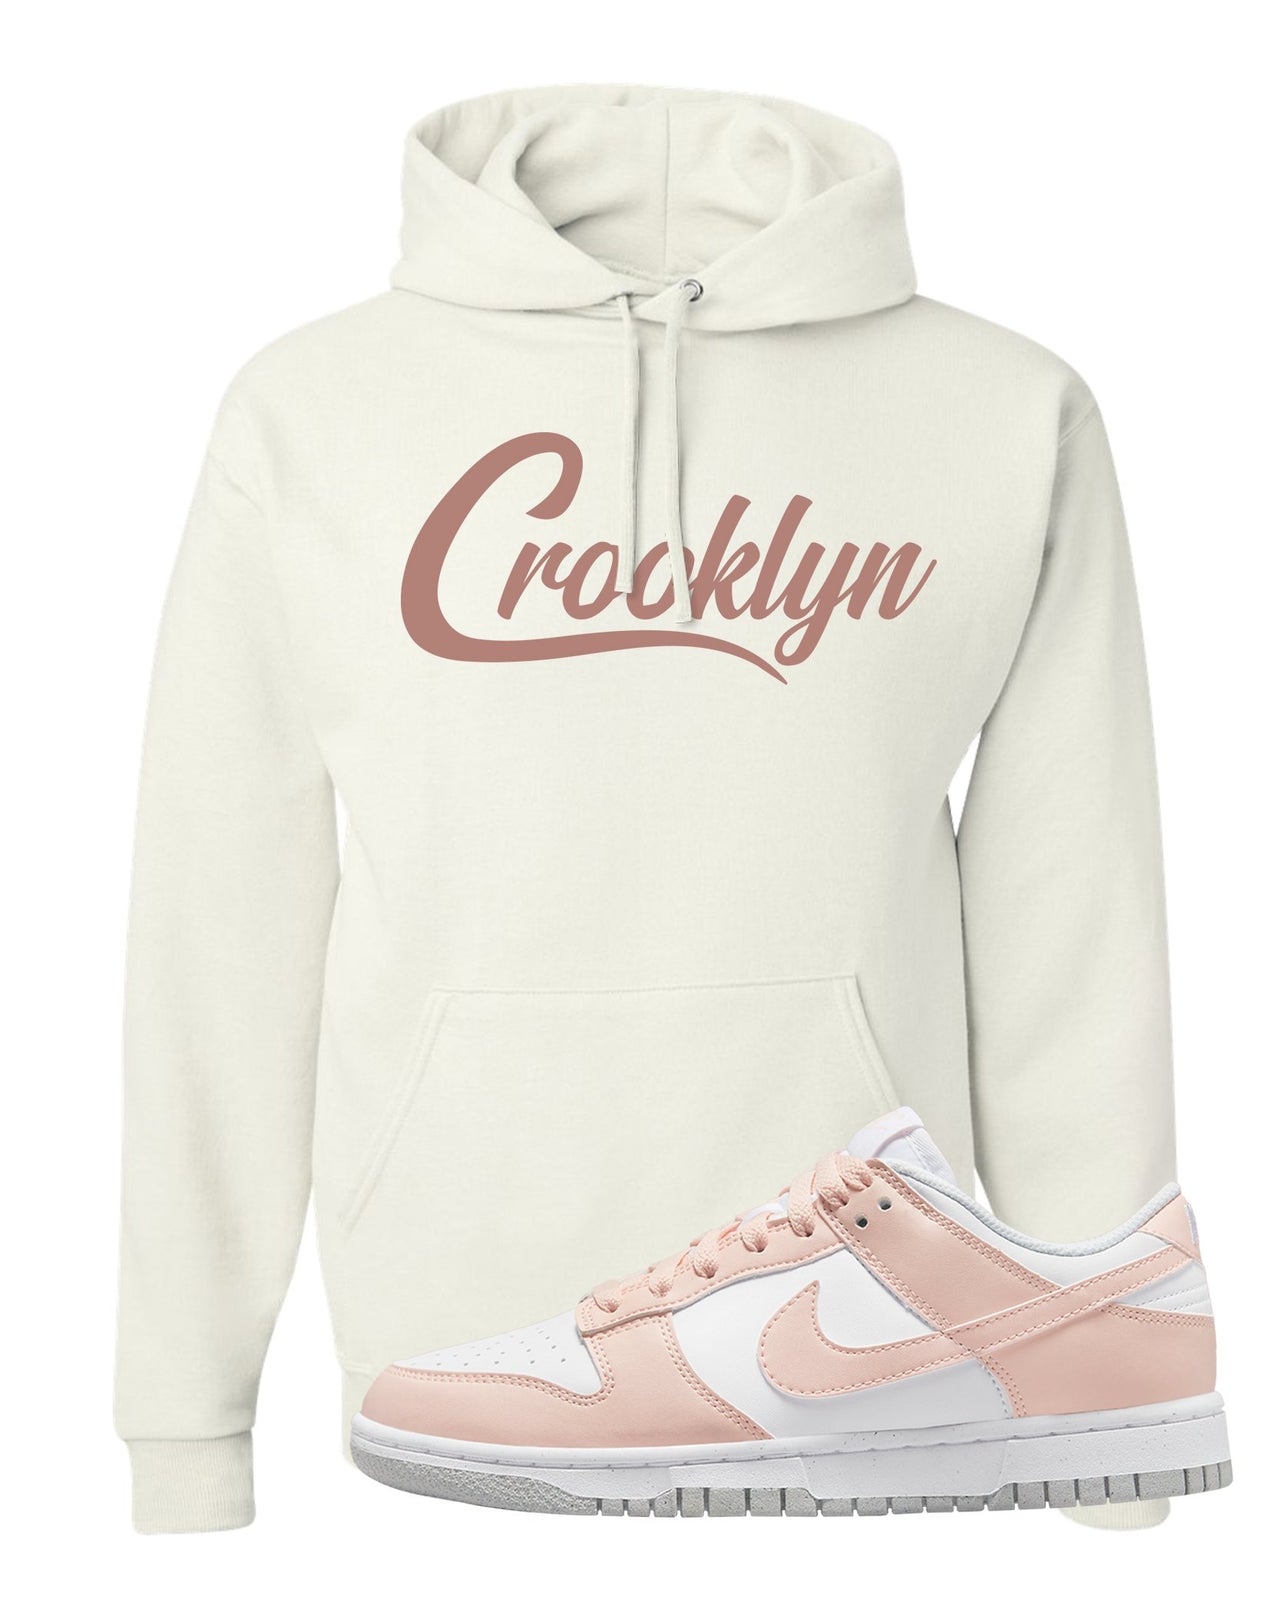 Next Nature Pale Citrus Low Dunks Hoodie | Crooklyn, White